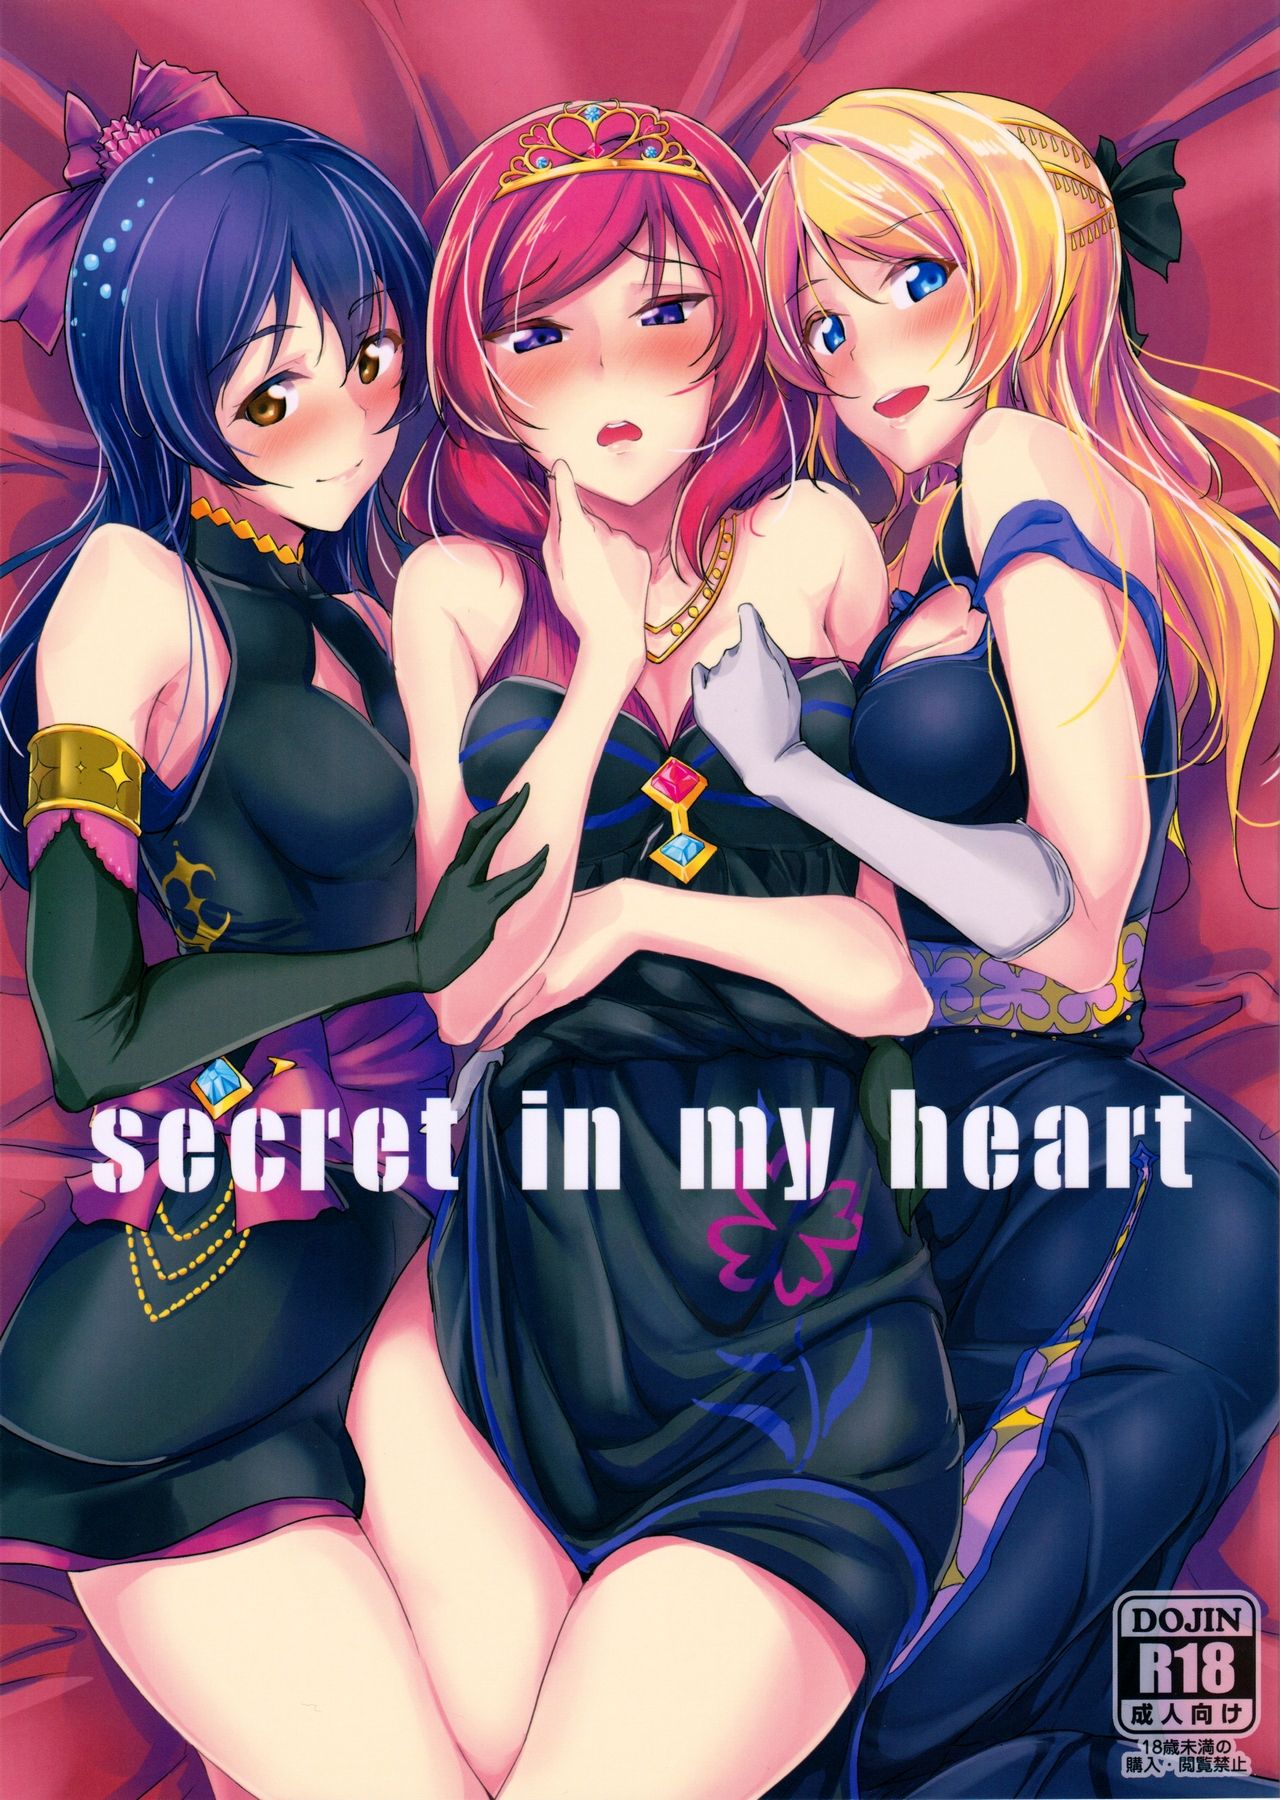 (C90) [Nuno no Ie (Moonlight)] secret in my heart (Love Live!) [English] {doujins.com} page 1 full